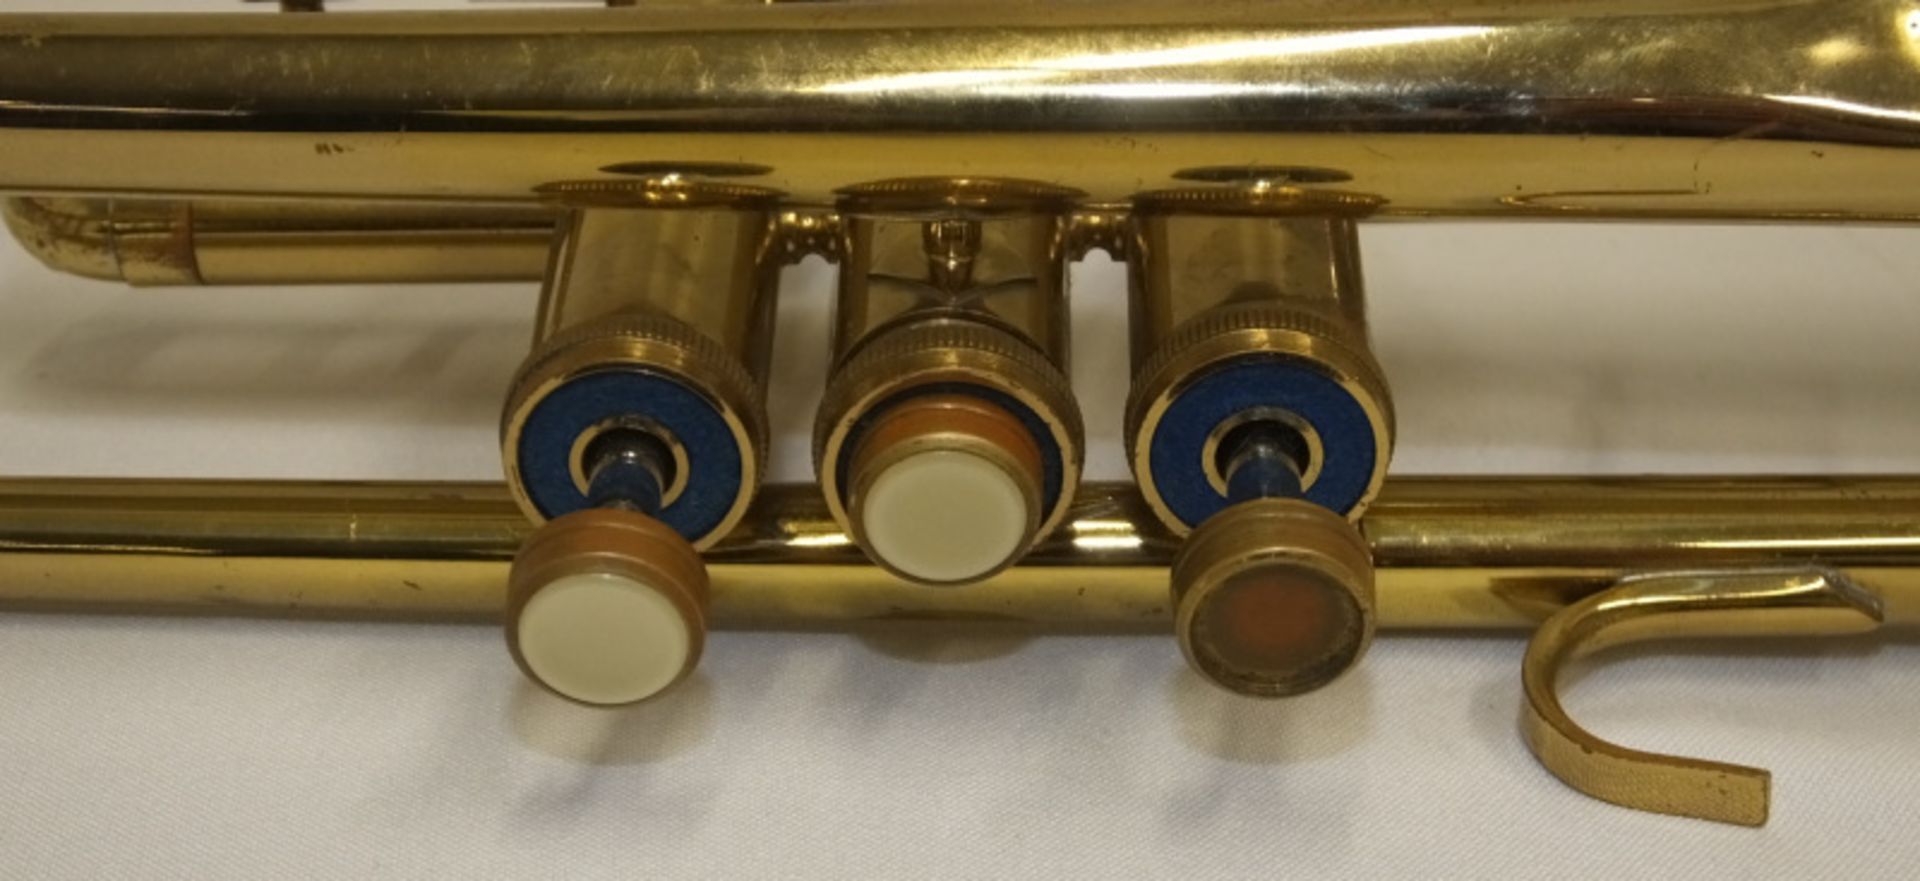 Corton 80 Trumpet in case (middle finger button stuck and no valve cap) - serial number 056142 - Image 9 of 13